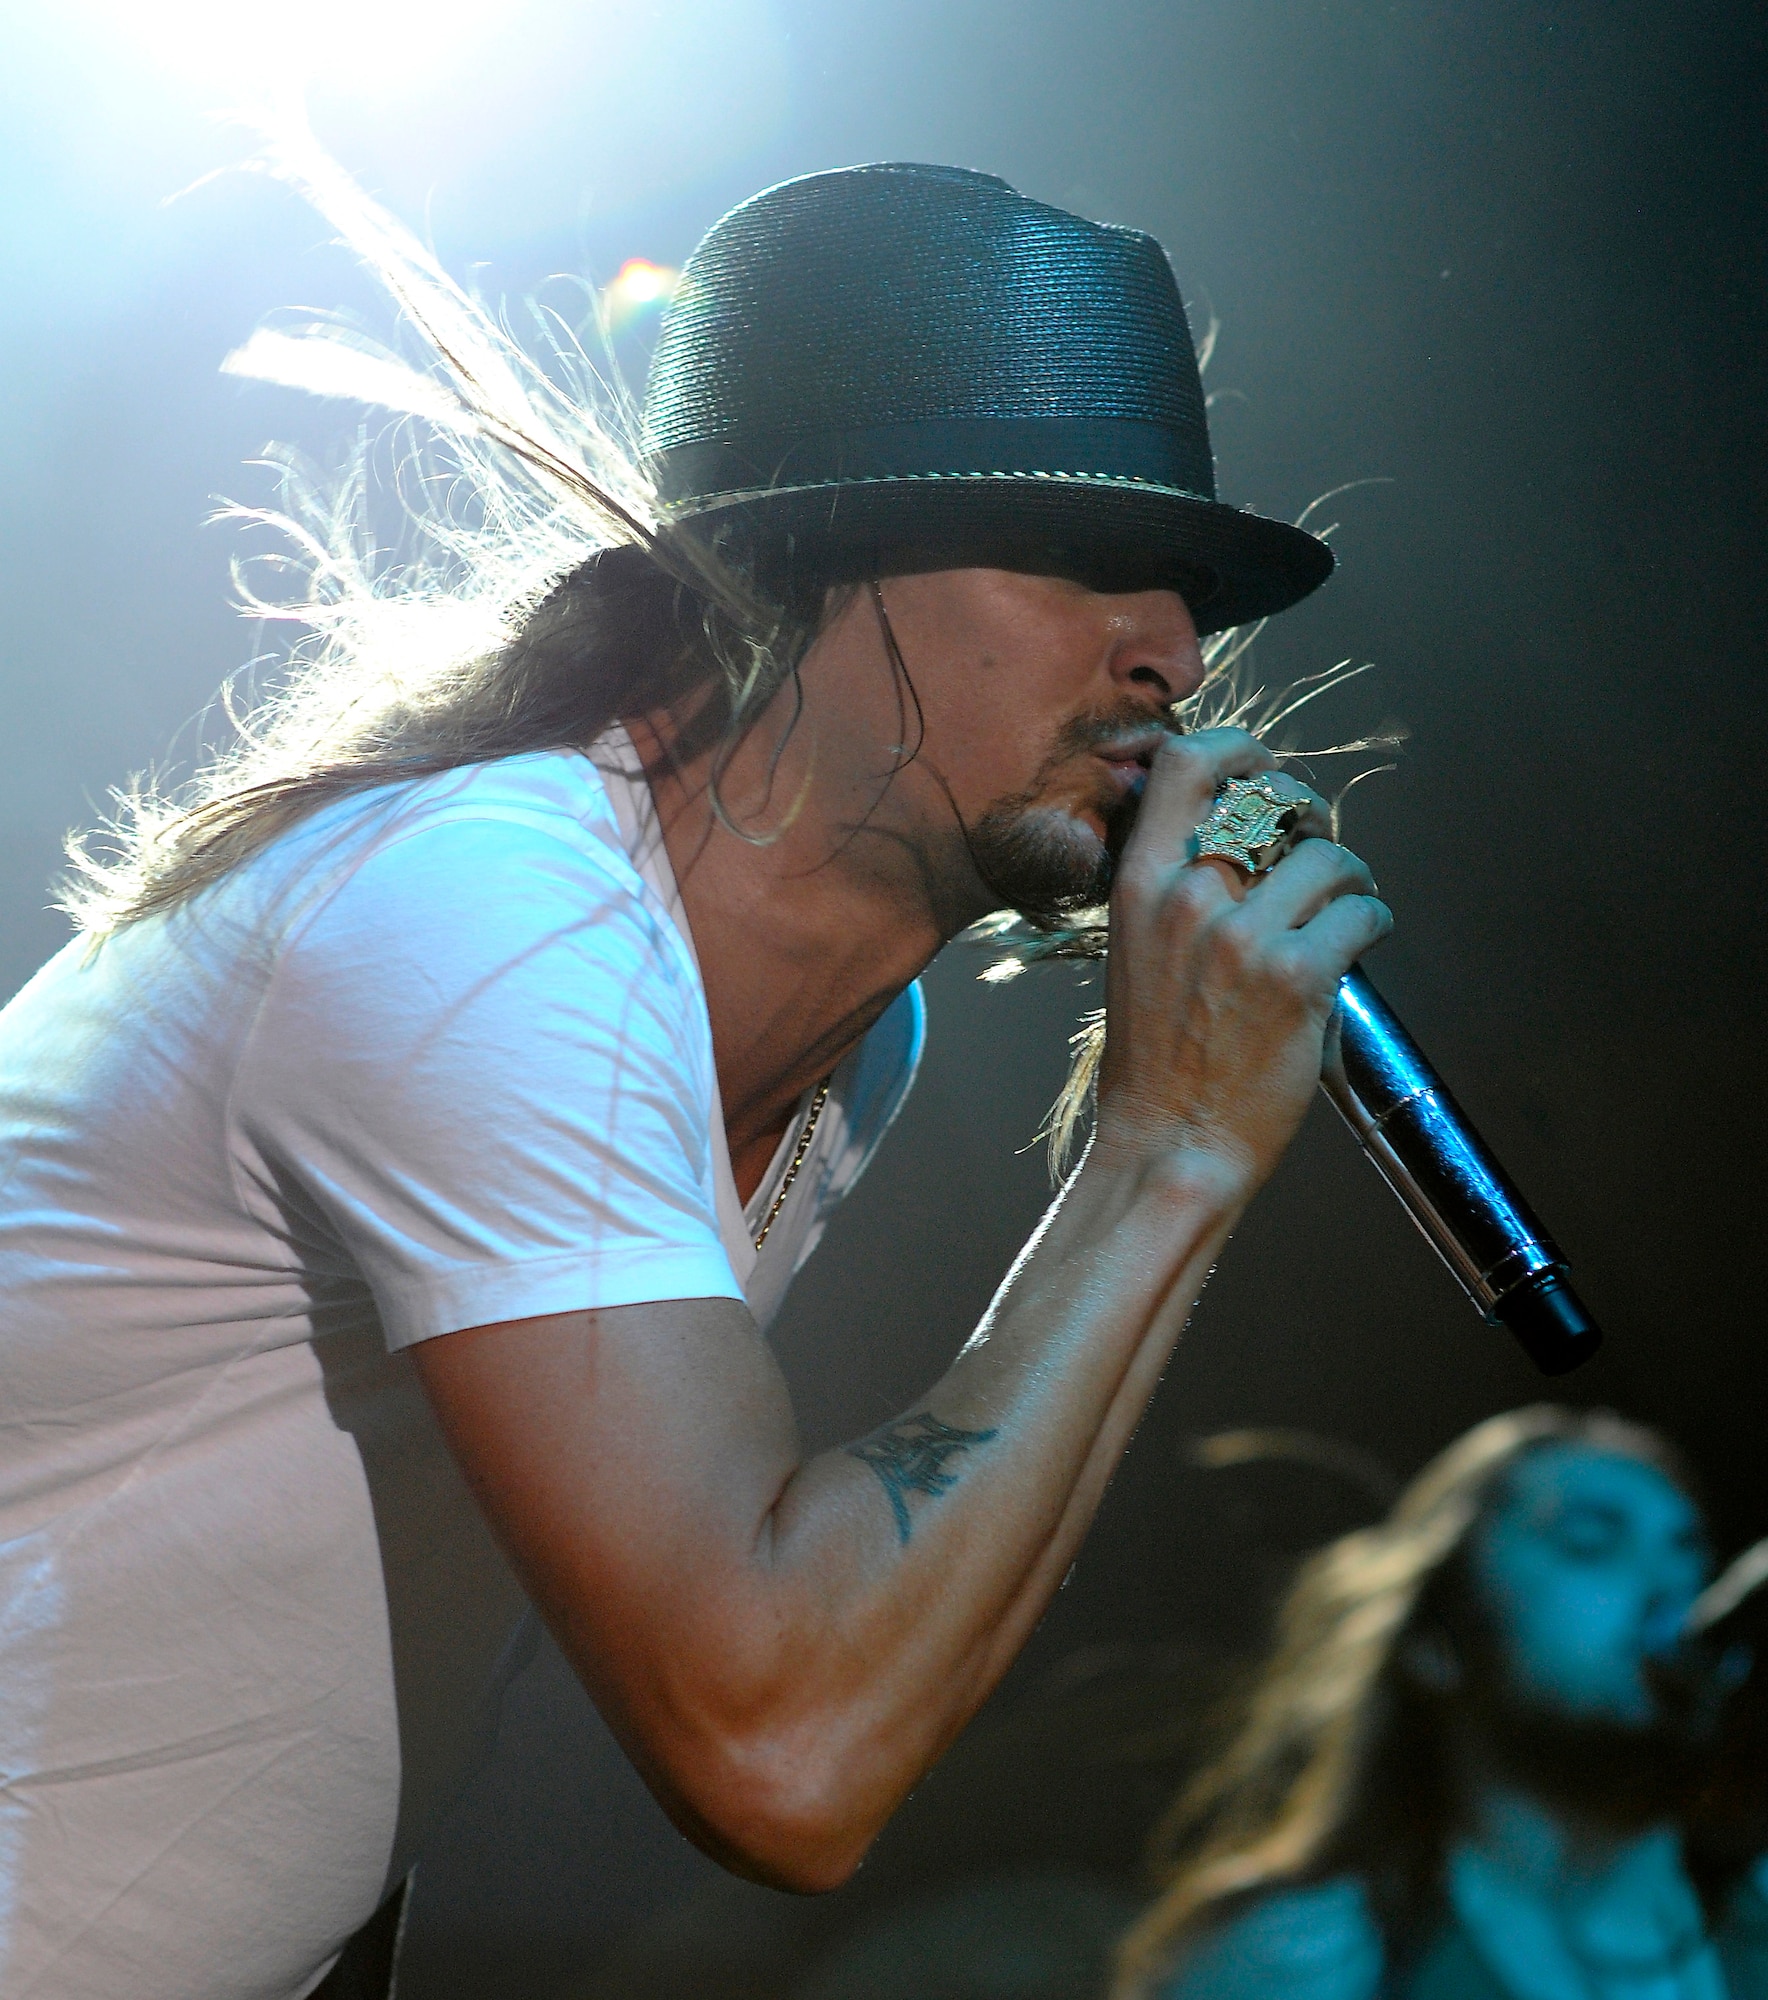 Kid Rock performs at the Tour for the Troops concert Tuesday Dec. 1, 2009, inside Hangar 4 at Incirlik Air Base, Turkey. Kid Rock and the Twisted Brown Truck Band, singer/songwriter Jessie James and comedian Carlos Mencia kicked off the tour making Incirlik their first stop to thank the troops. The three entertainers also visited various places around the base including the 39th Security Forces Squadron, Incirlik’s American Forces Network studio and the 39th Force Support Squadron. (U.S. Air Force photo/Airman 1st Class Amber Ashcraft)